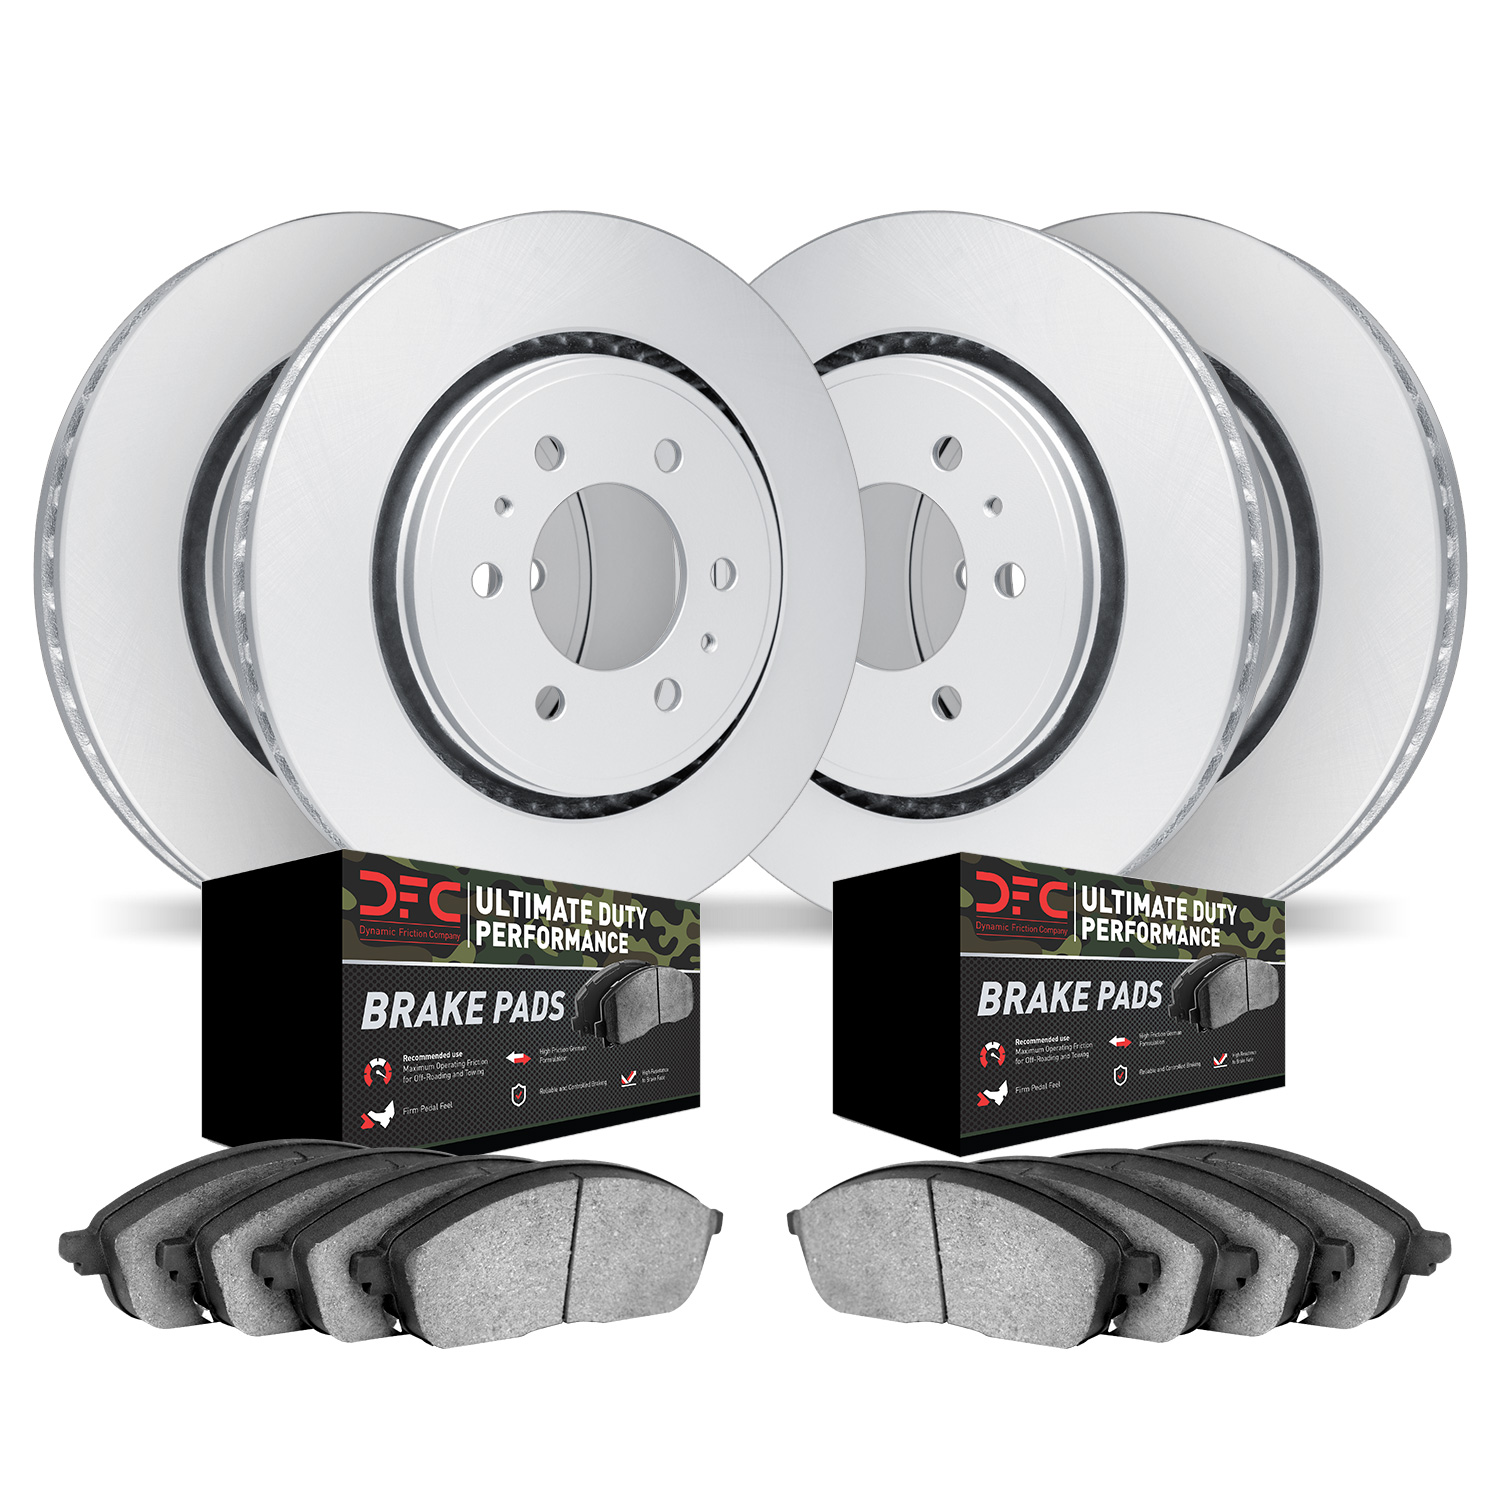 4404-76003 Geospec Brake Rotors with Ultimate-Duty Brake Pads Kit, 2003-2009 Lexus/Toyota/Scion, Position: Front and Rear